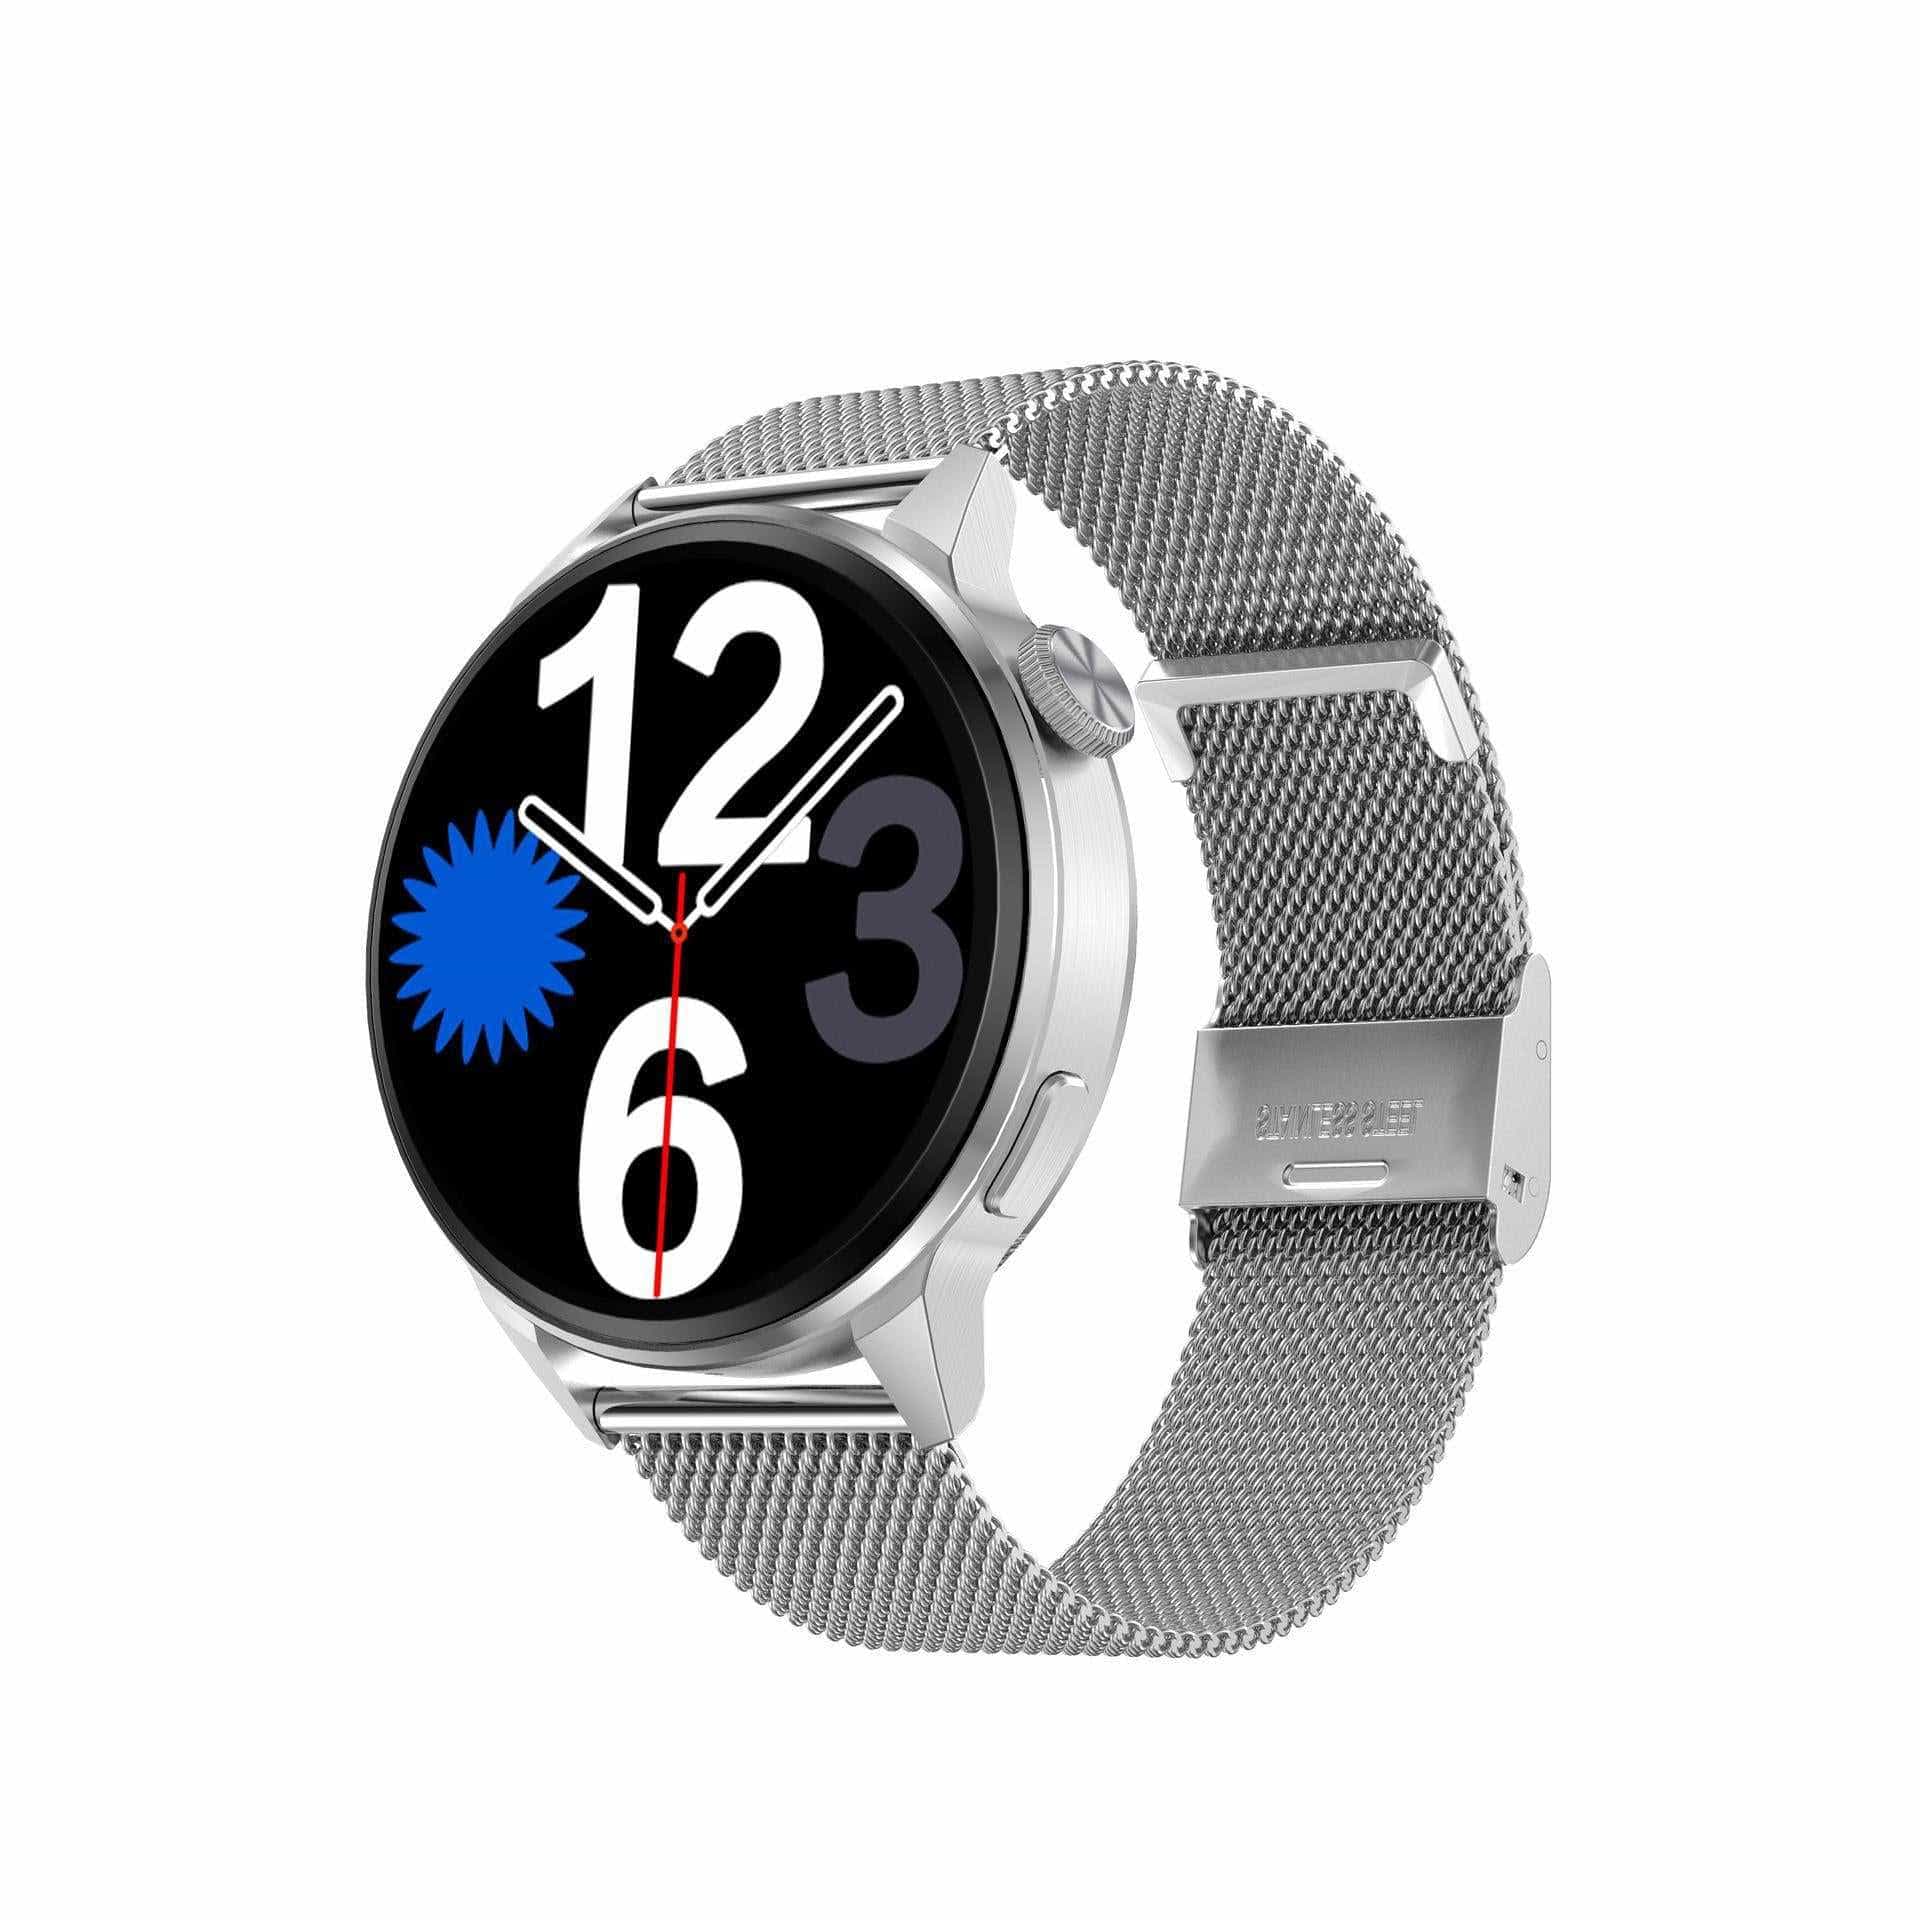 Fashionable Smartwatch With Bluetooth Calling And Wireless Charging Meifu Market